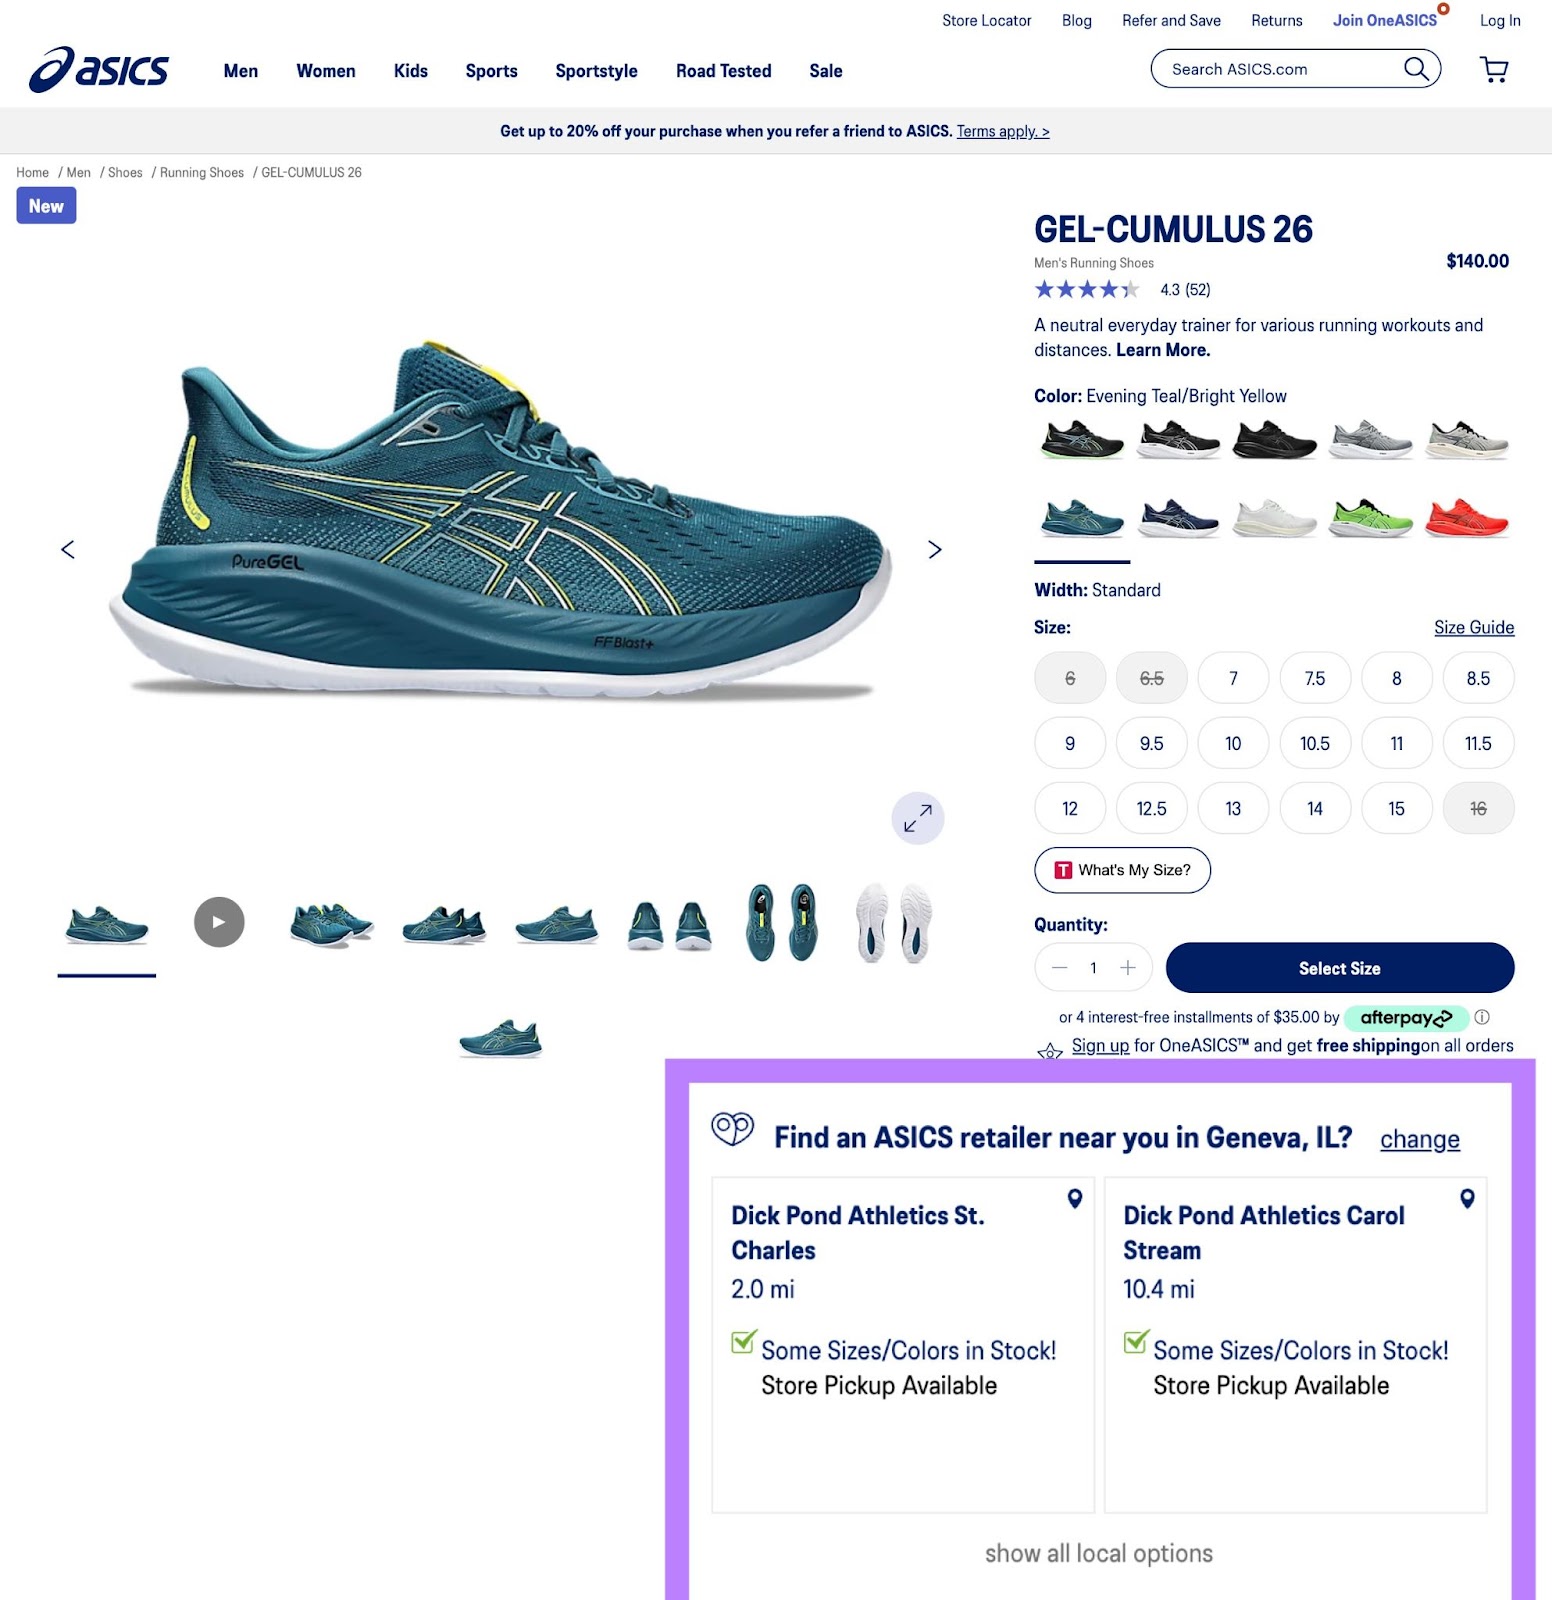 Dynamic product page uses customer location to find local retailers who sell this shoe